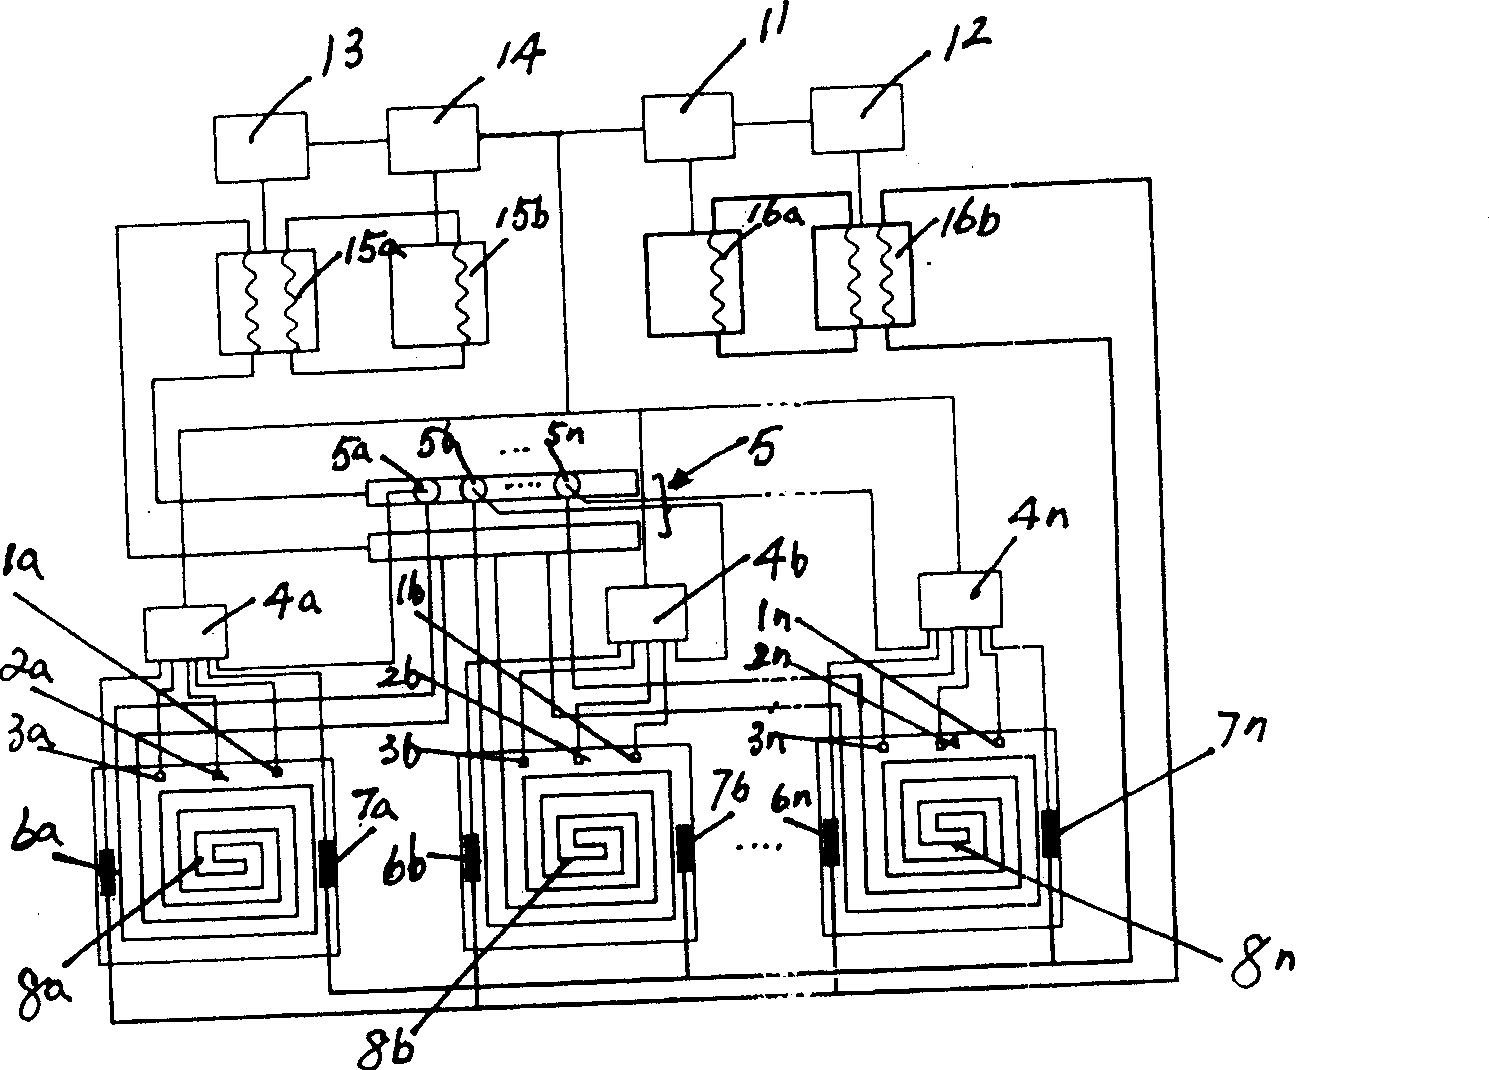 Flooring radiative cooling air conditioning system